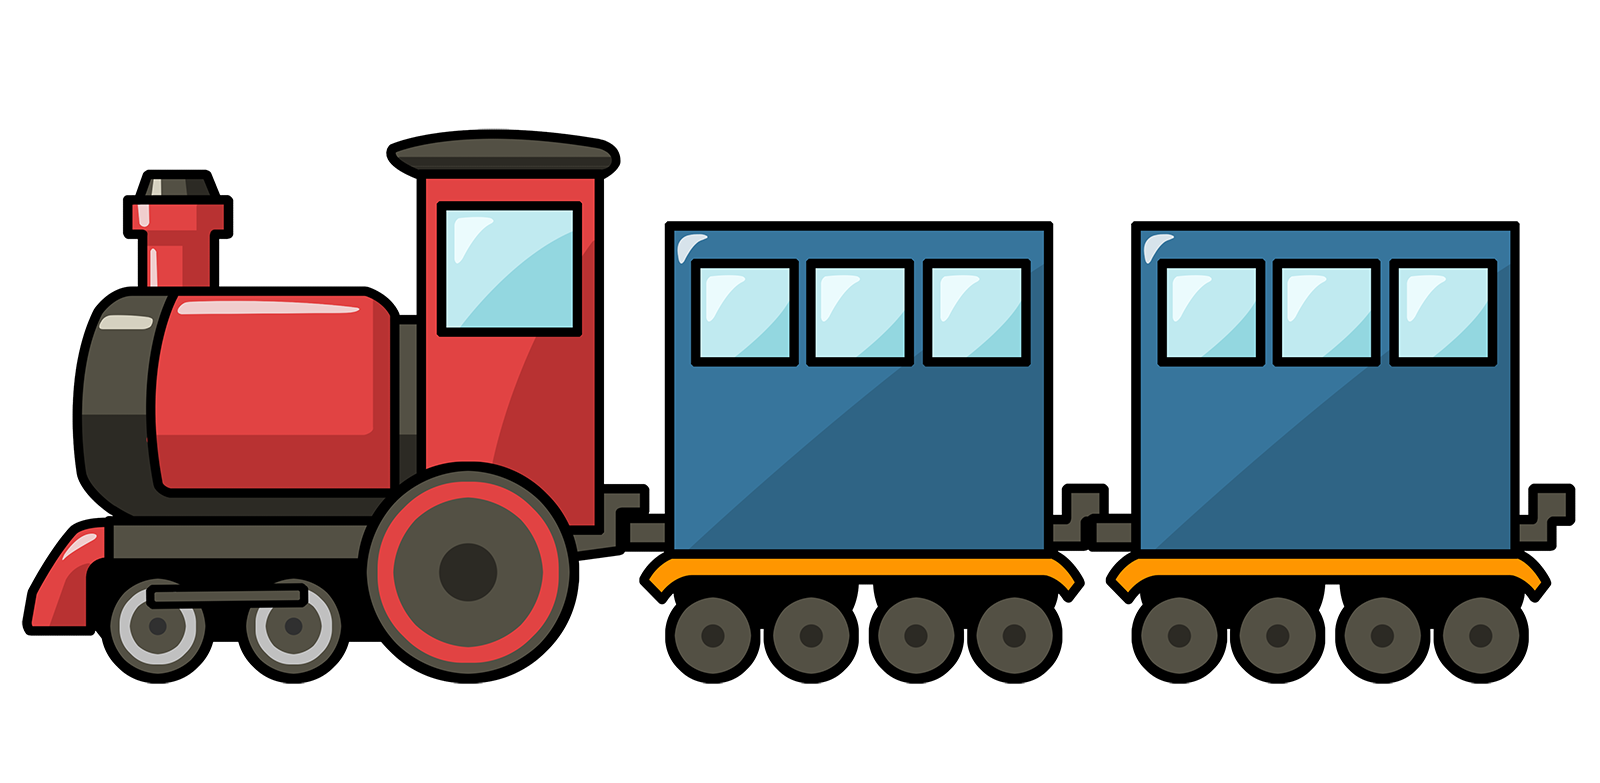 Animated Pictures Of Trains - Cliparts.co